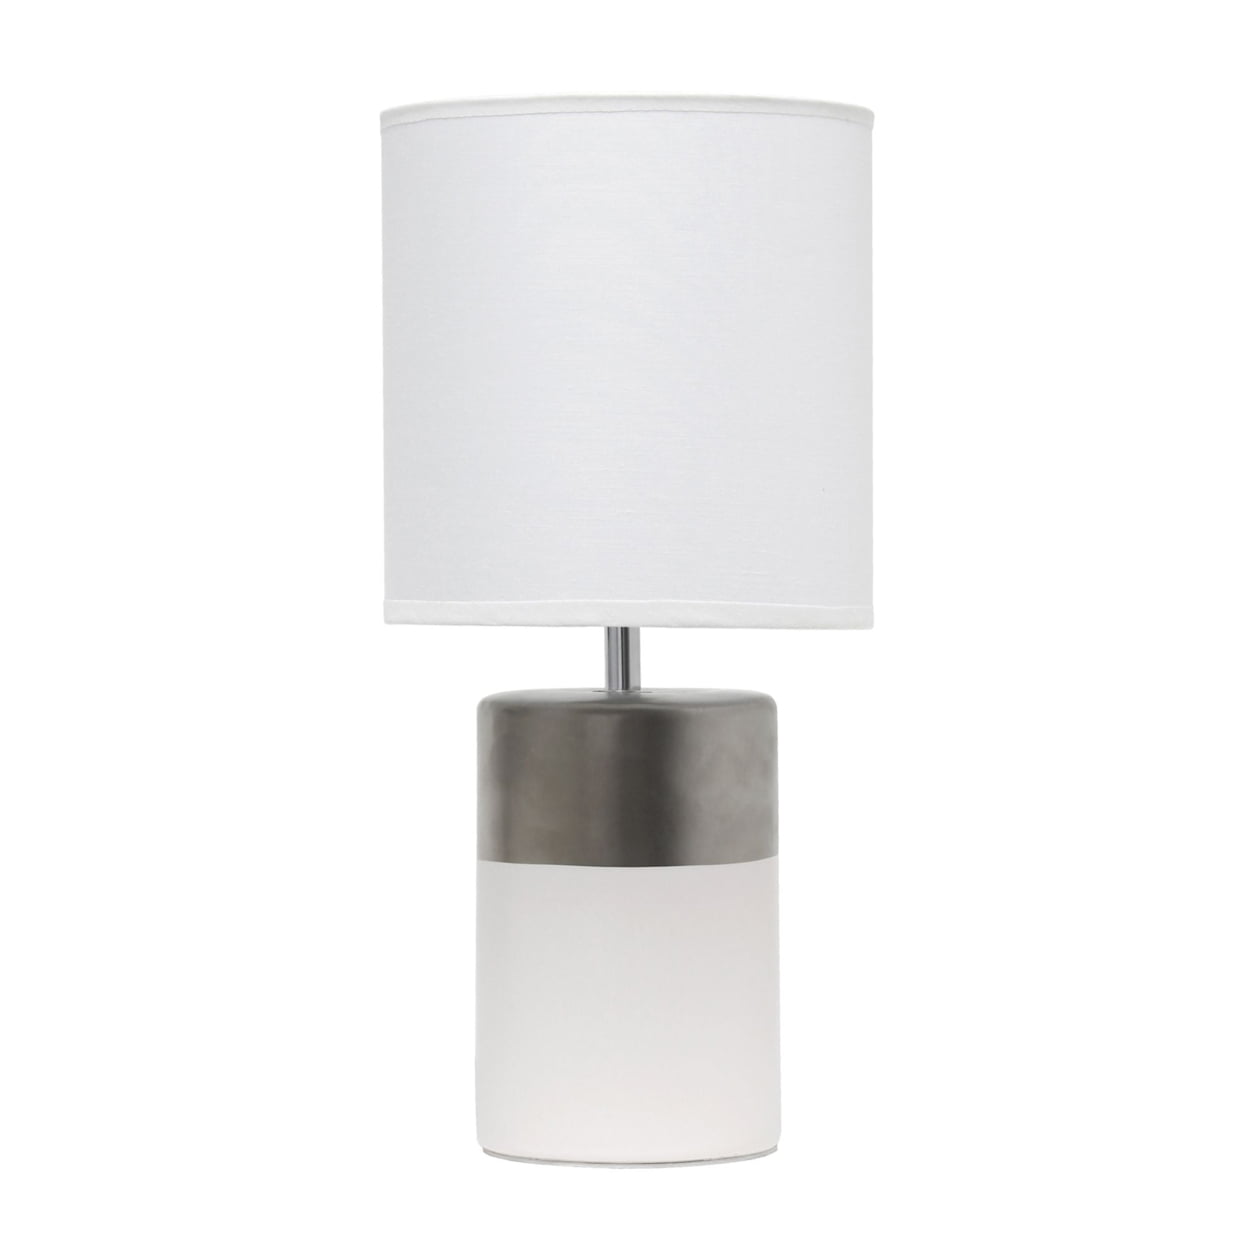 Simple Designs Two Toned Basics Table Lamp, White and Silver